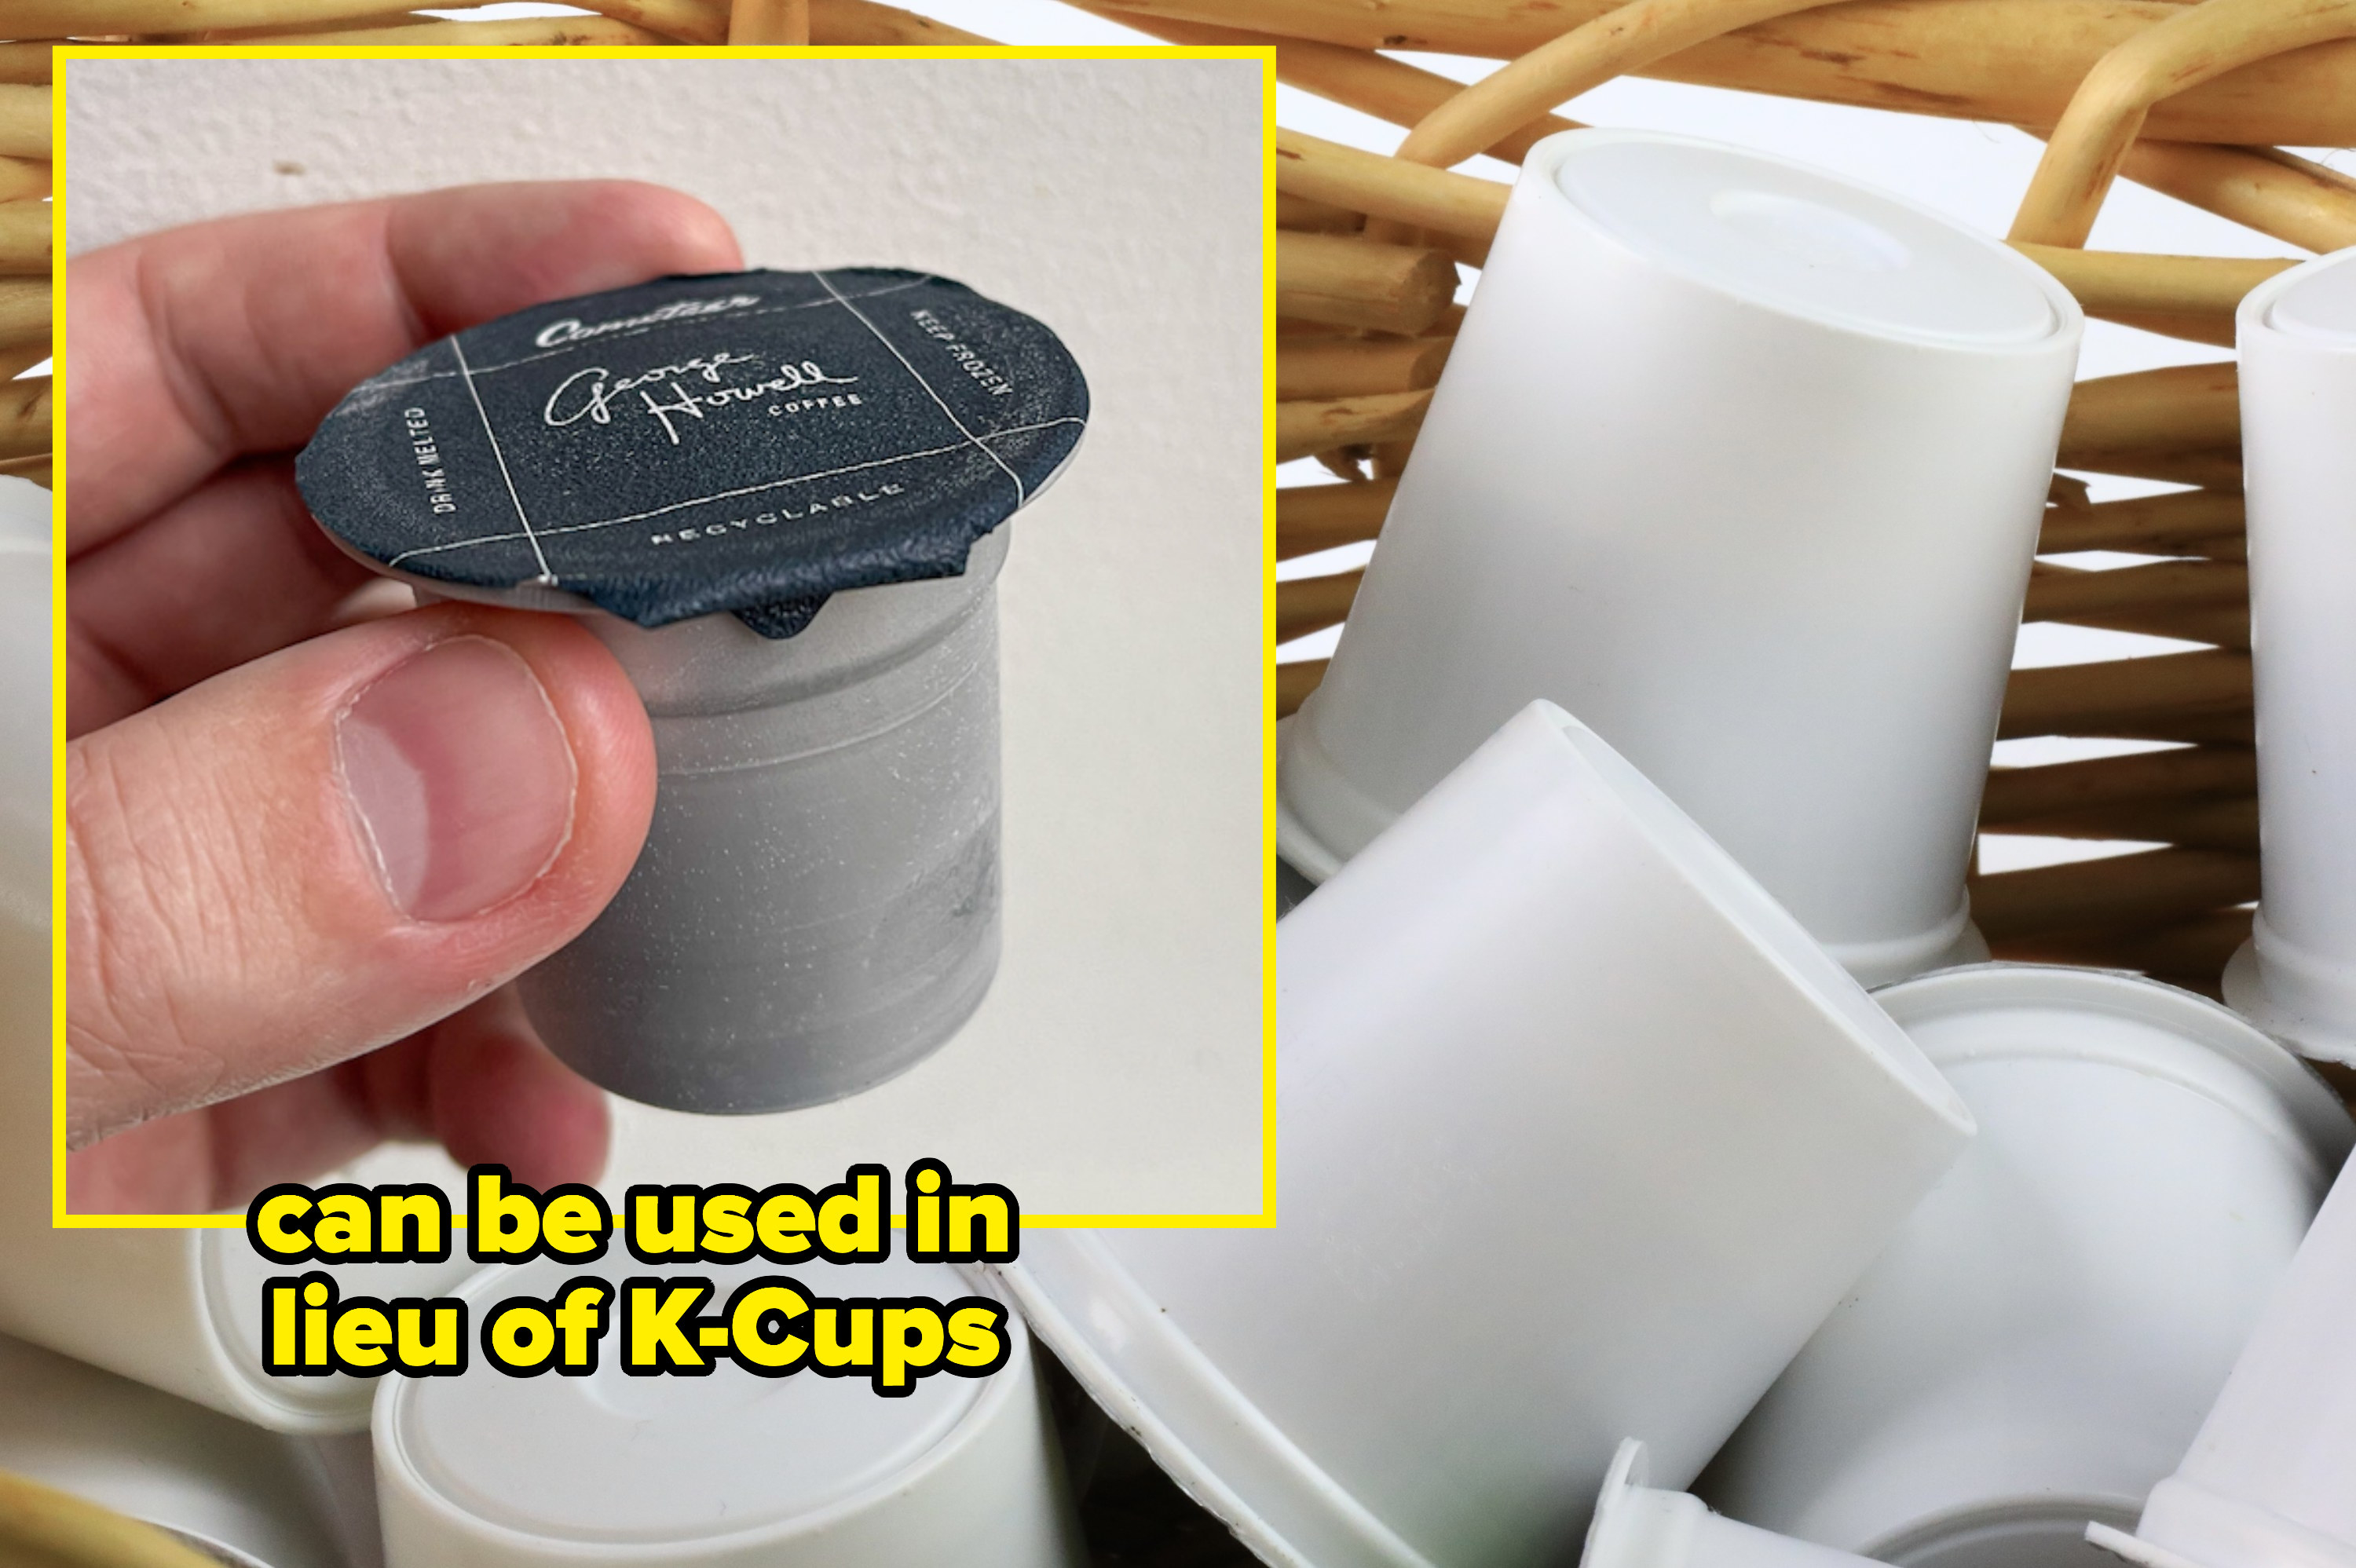 can be used in lieu of K-Cups